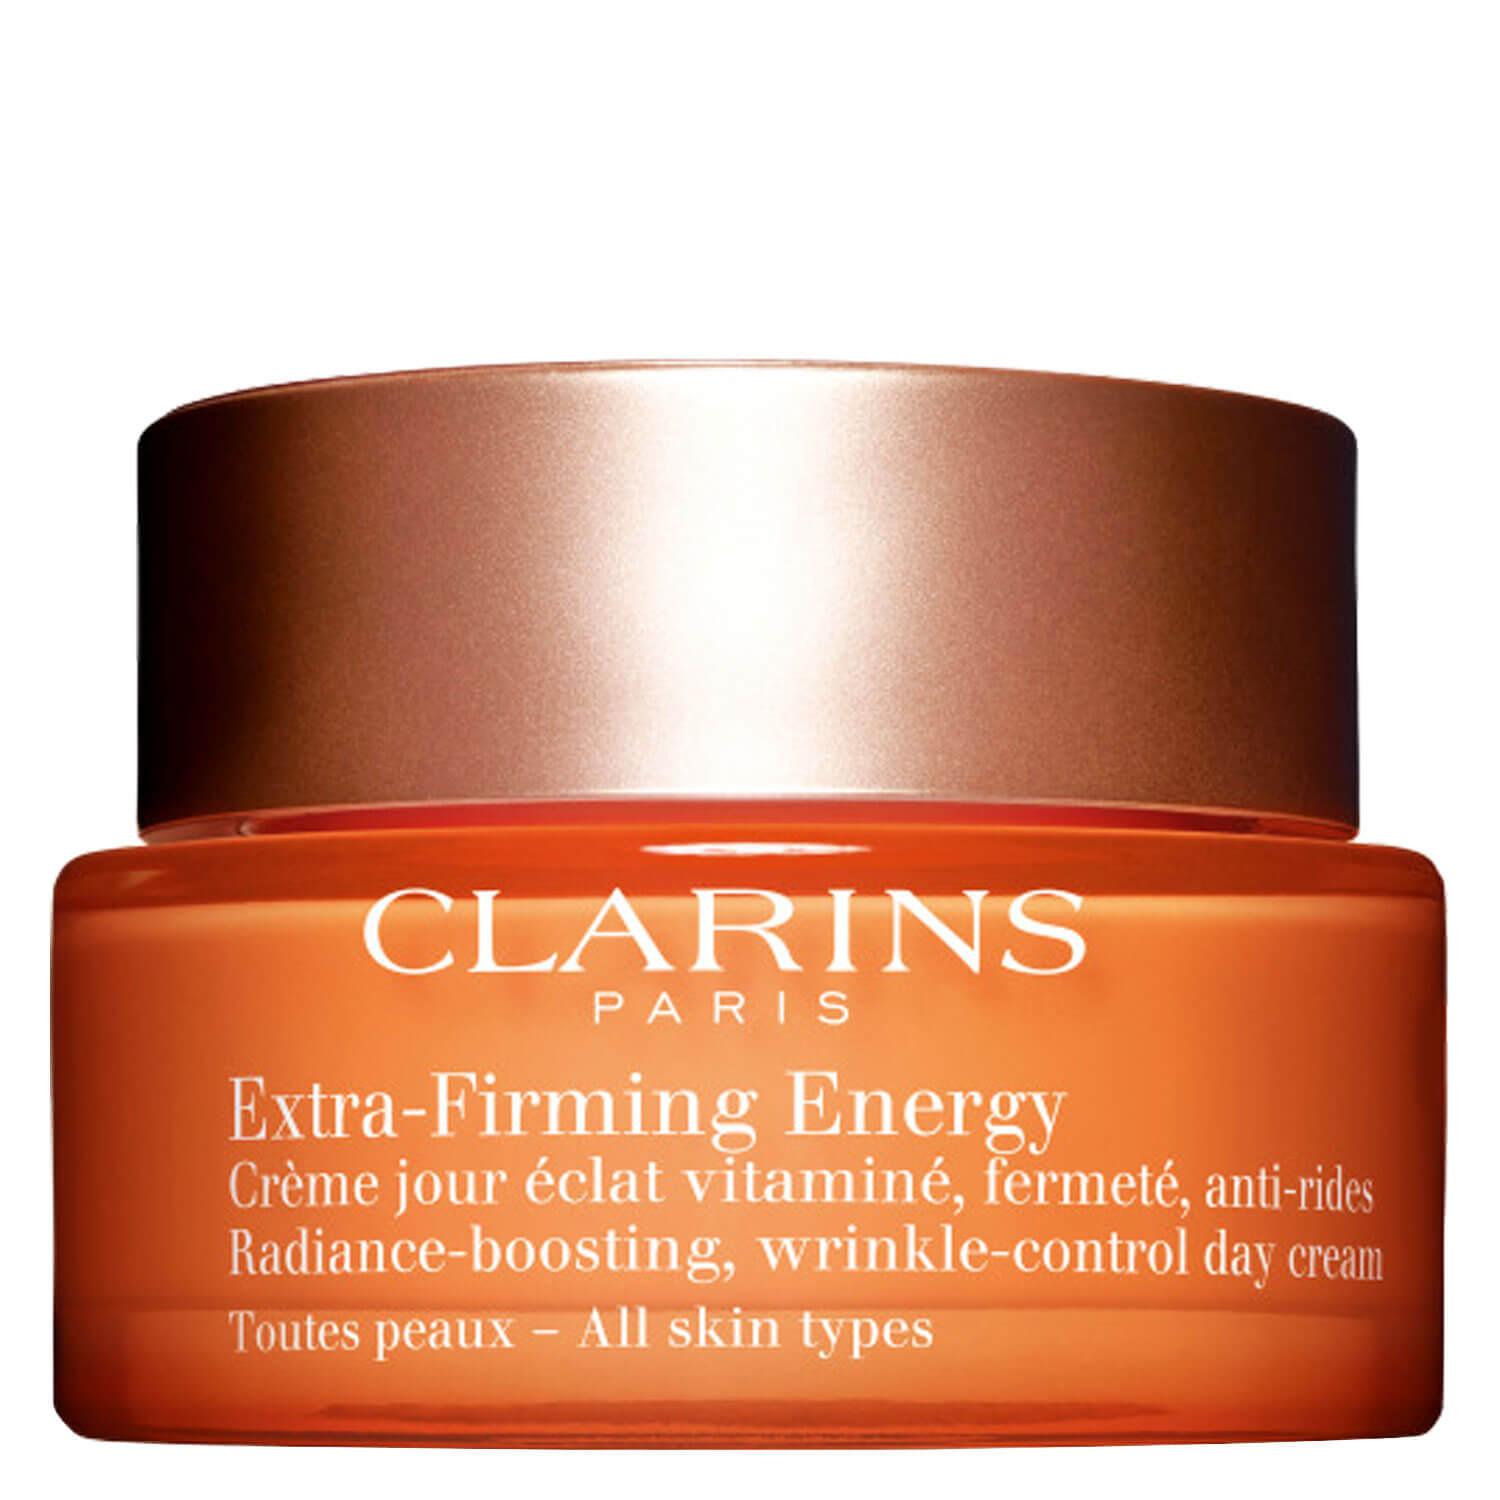 Extra-Firming - Energy Crème Jour